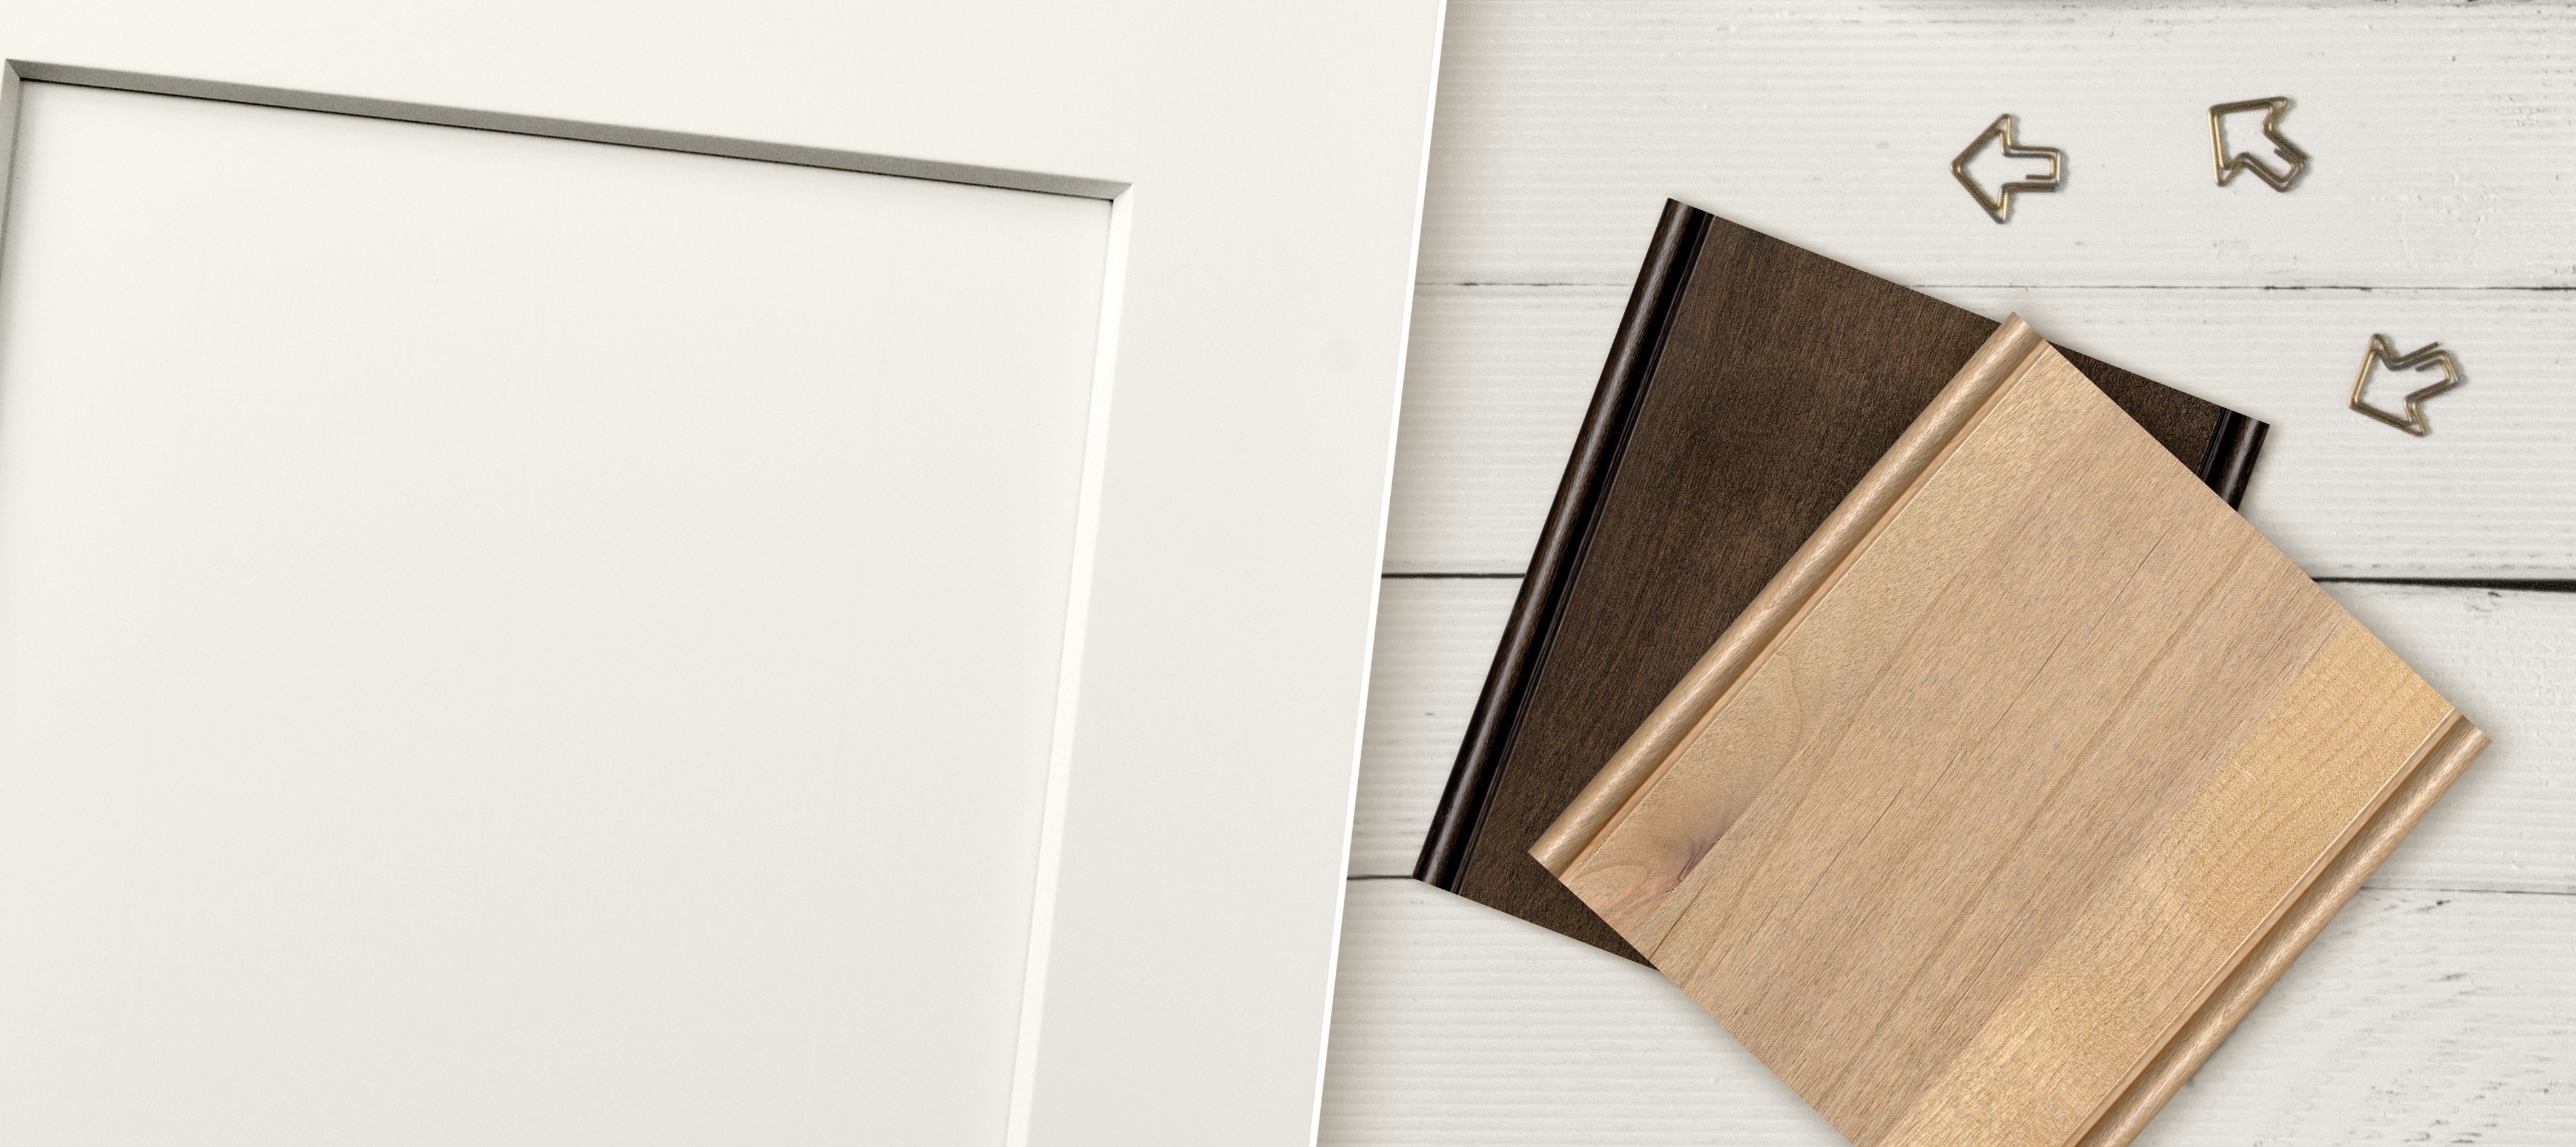 A soft, off-white painted shaker door style with two natural brown stain samples.